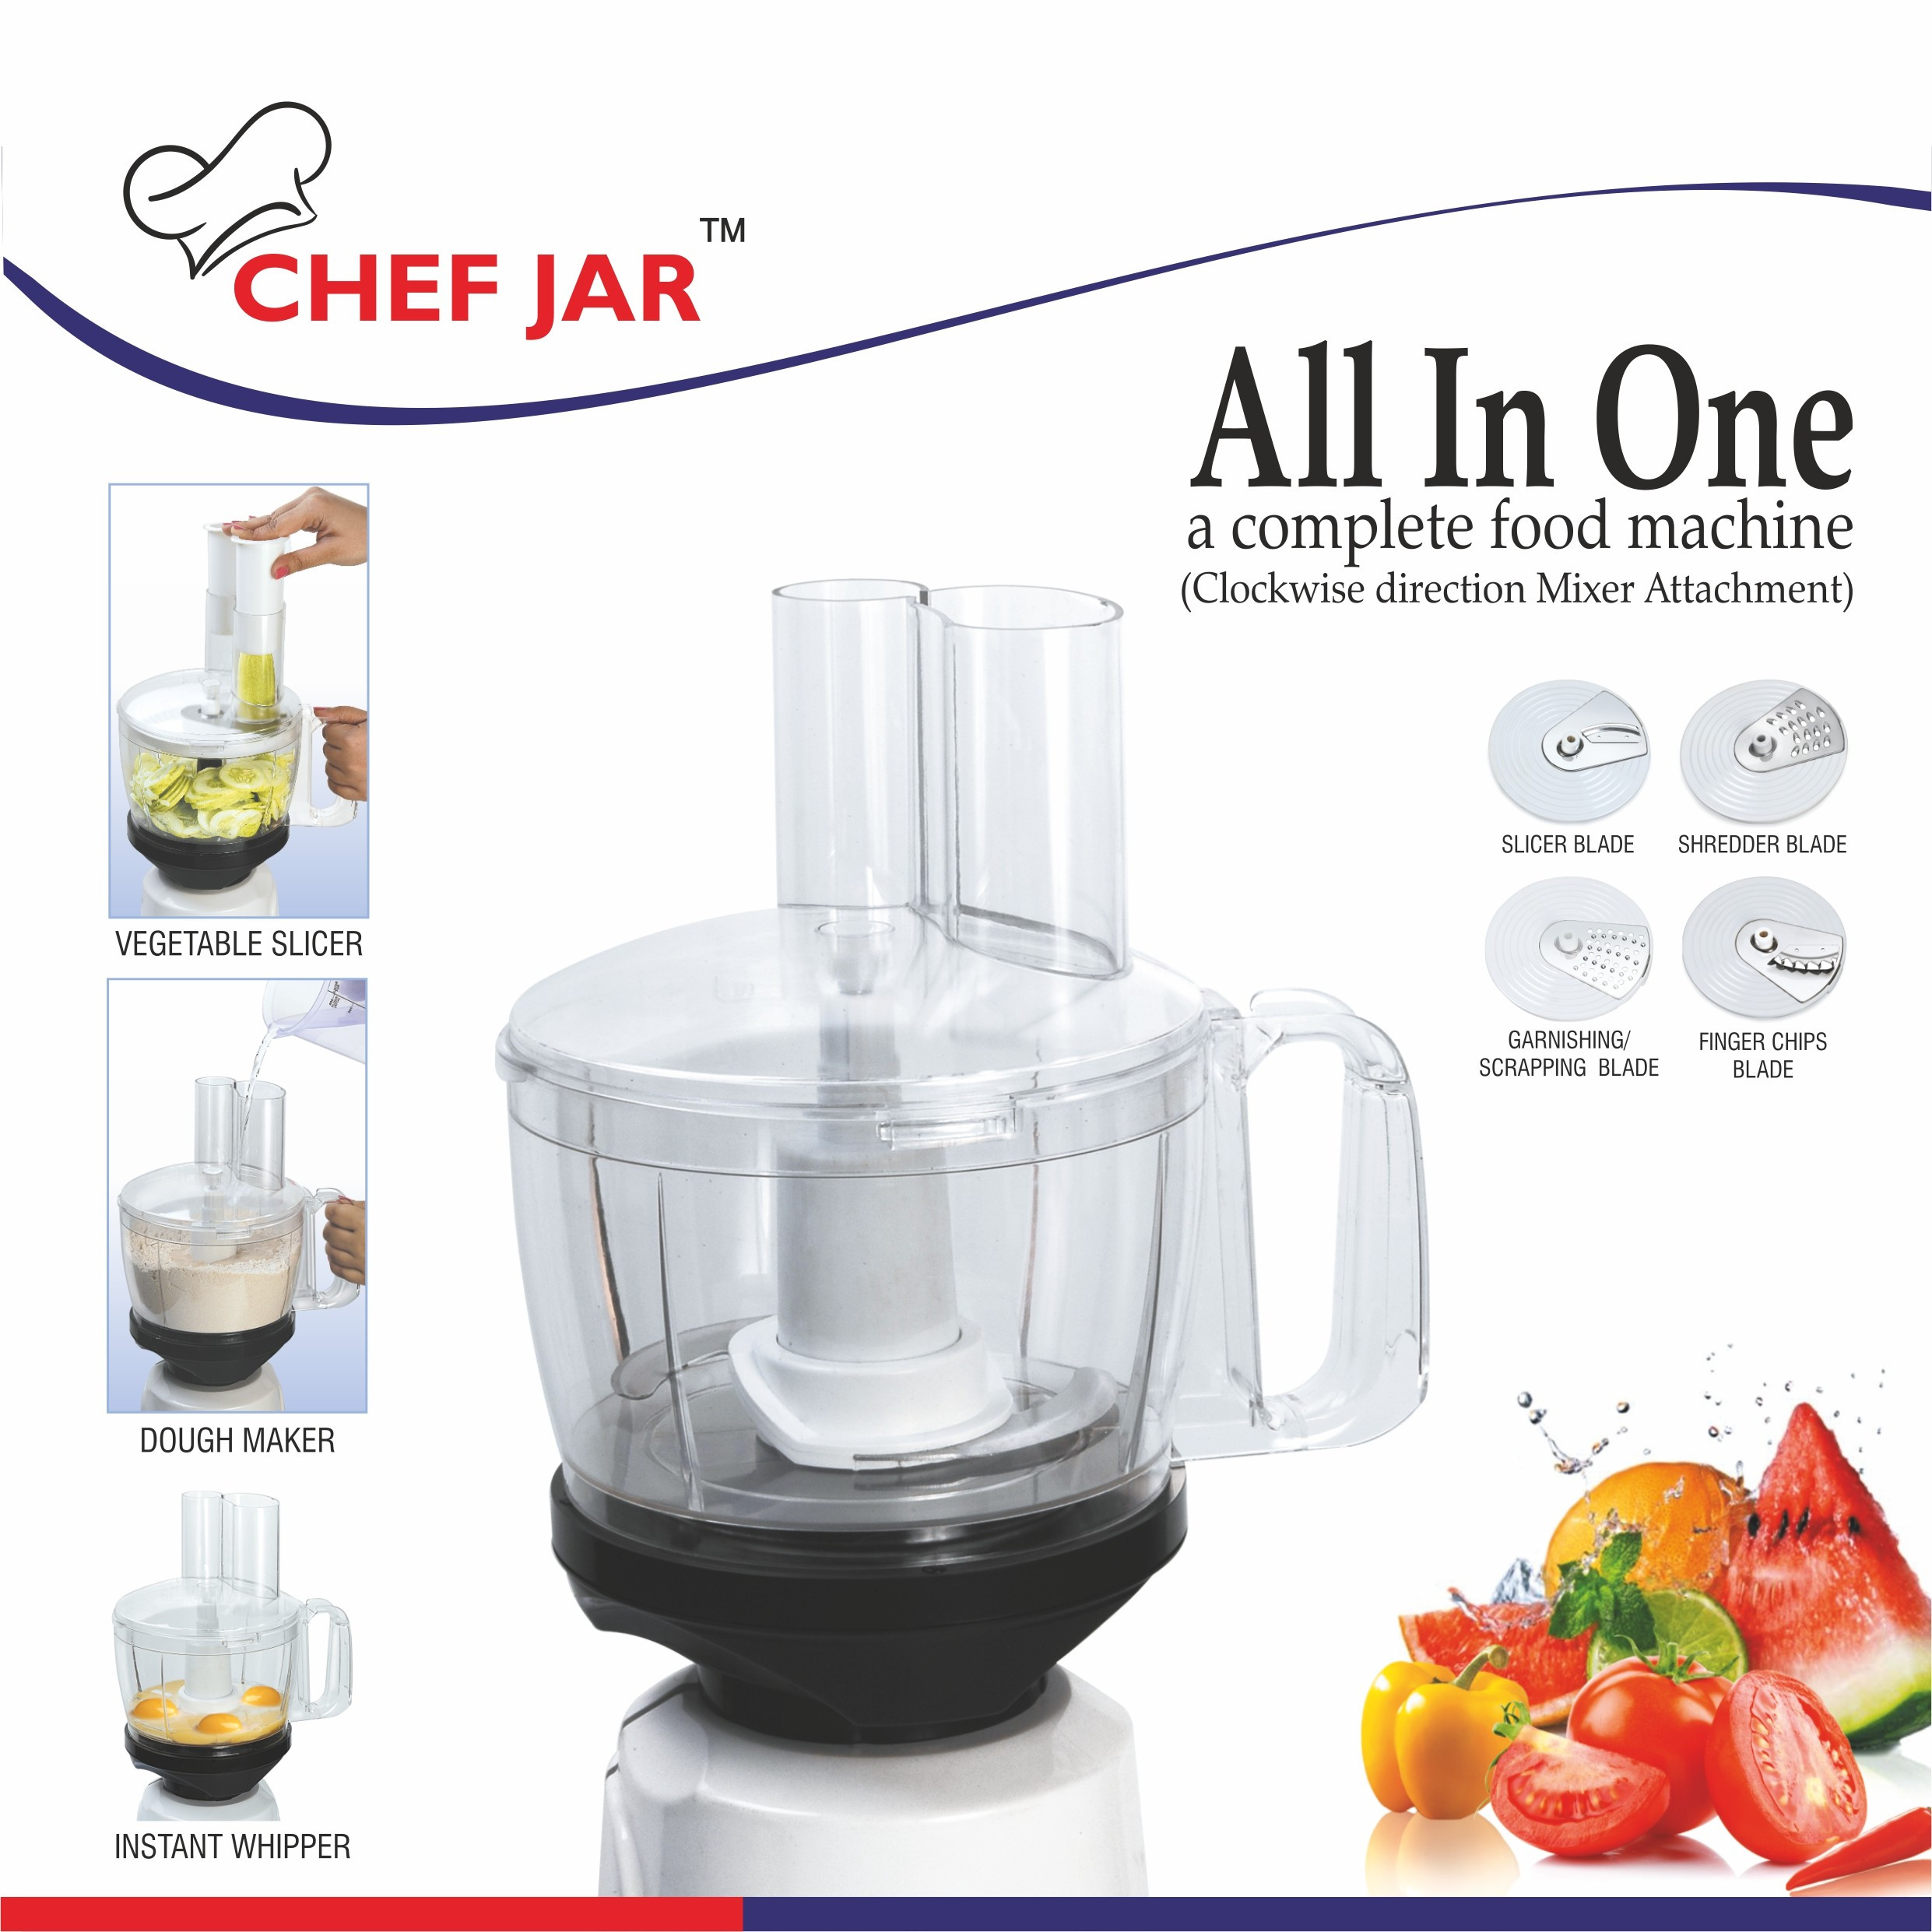 bajaj-bravo-plus-500w-indian-mixer-grinder-with-special-chef-jar-stainless-steel-jars-indian-mixer-grinder-spice-coffee-grinder-110v-for-use-in-canada-usa12